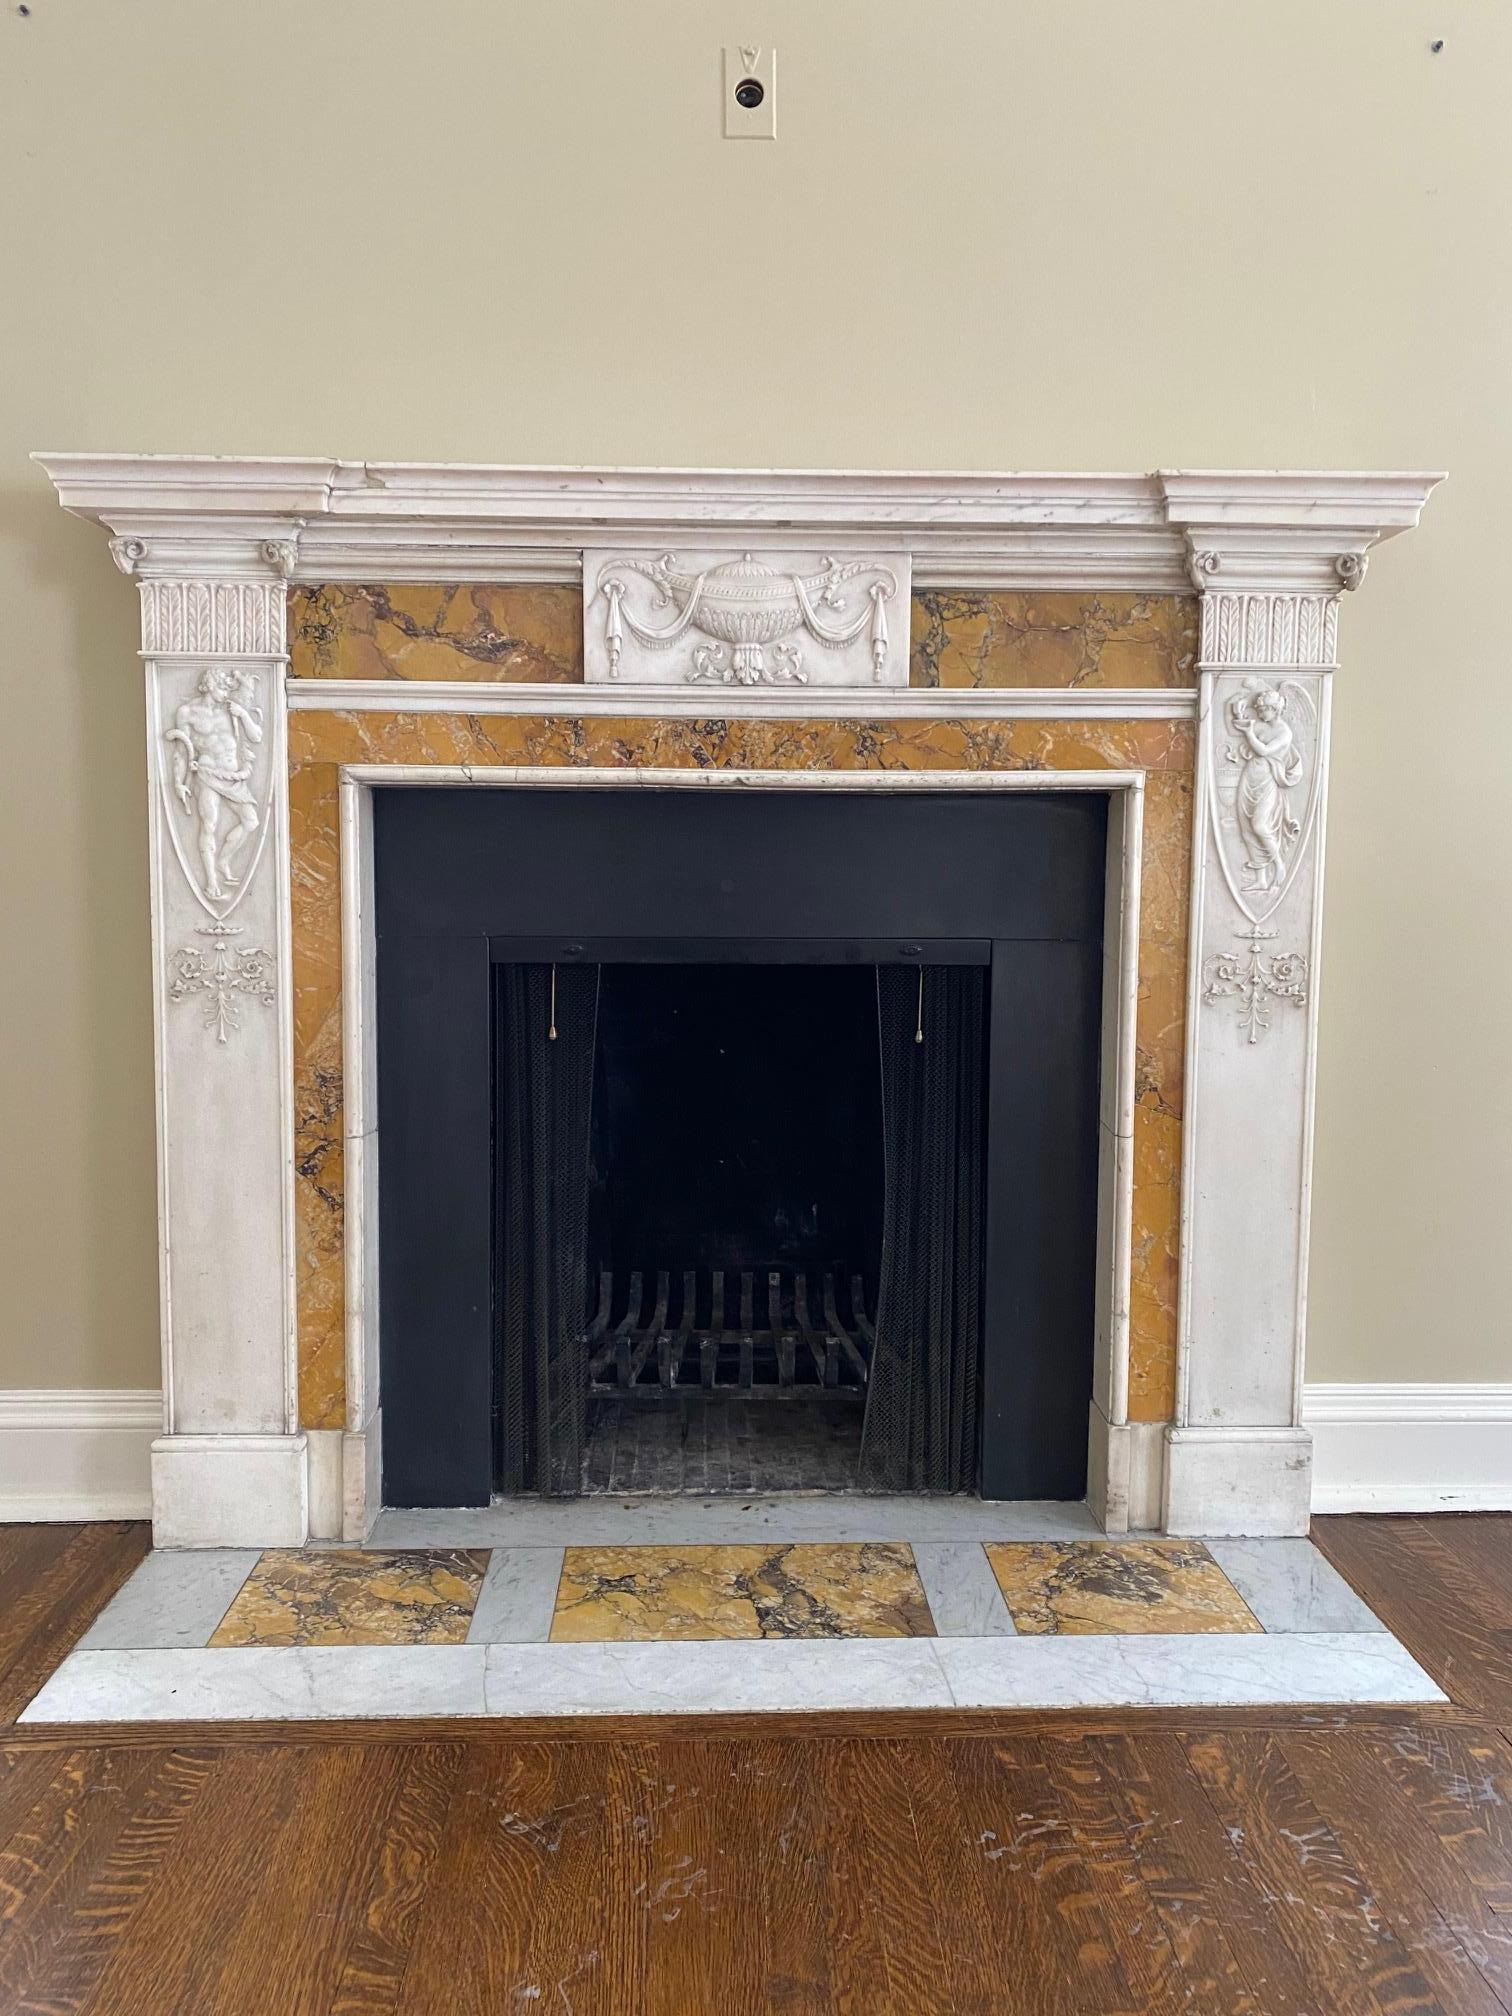 Important Georgian period fireplace mantel, white statuary marble and inset with Siena . The finely carved Neo -Classical attributes featuring a central cartouche relief cavings of a Neo-Classical urn flanked by relief carvings of 